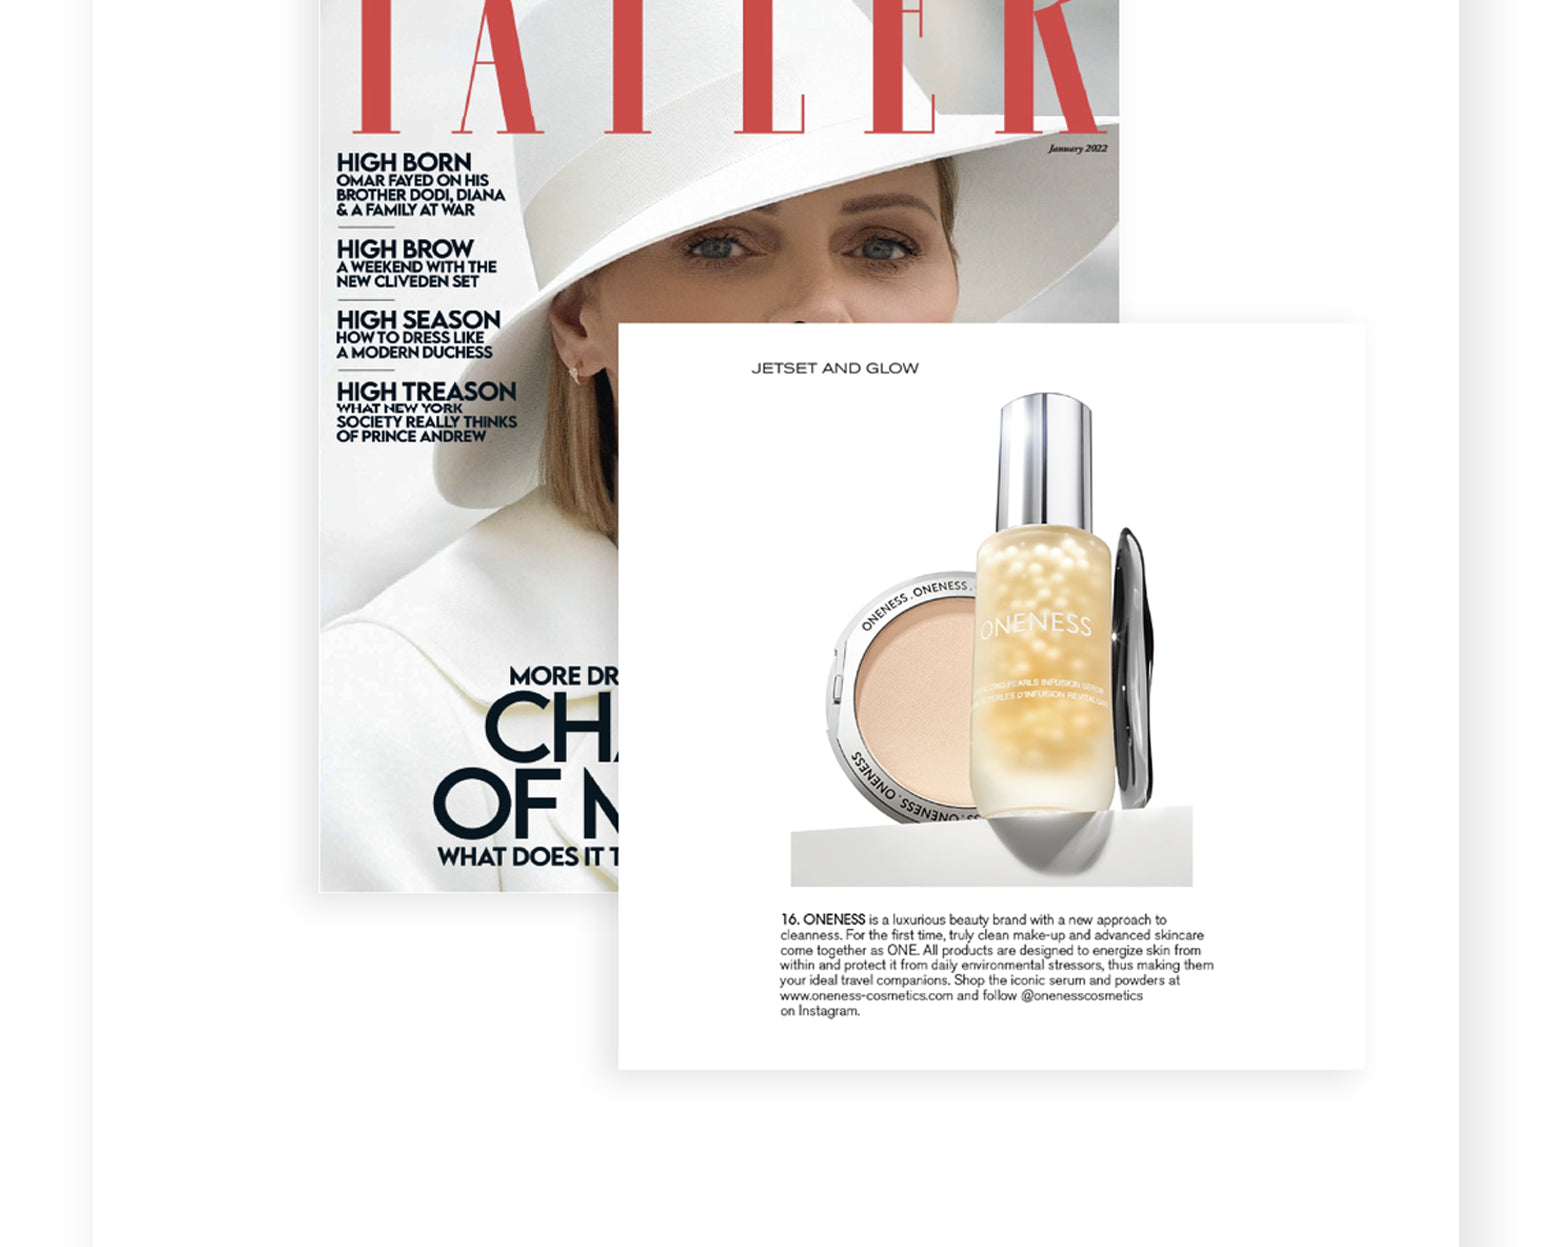 AS FEATURED IN TATLER